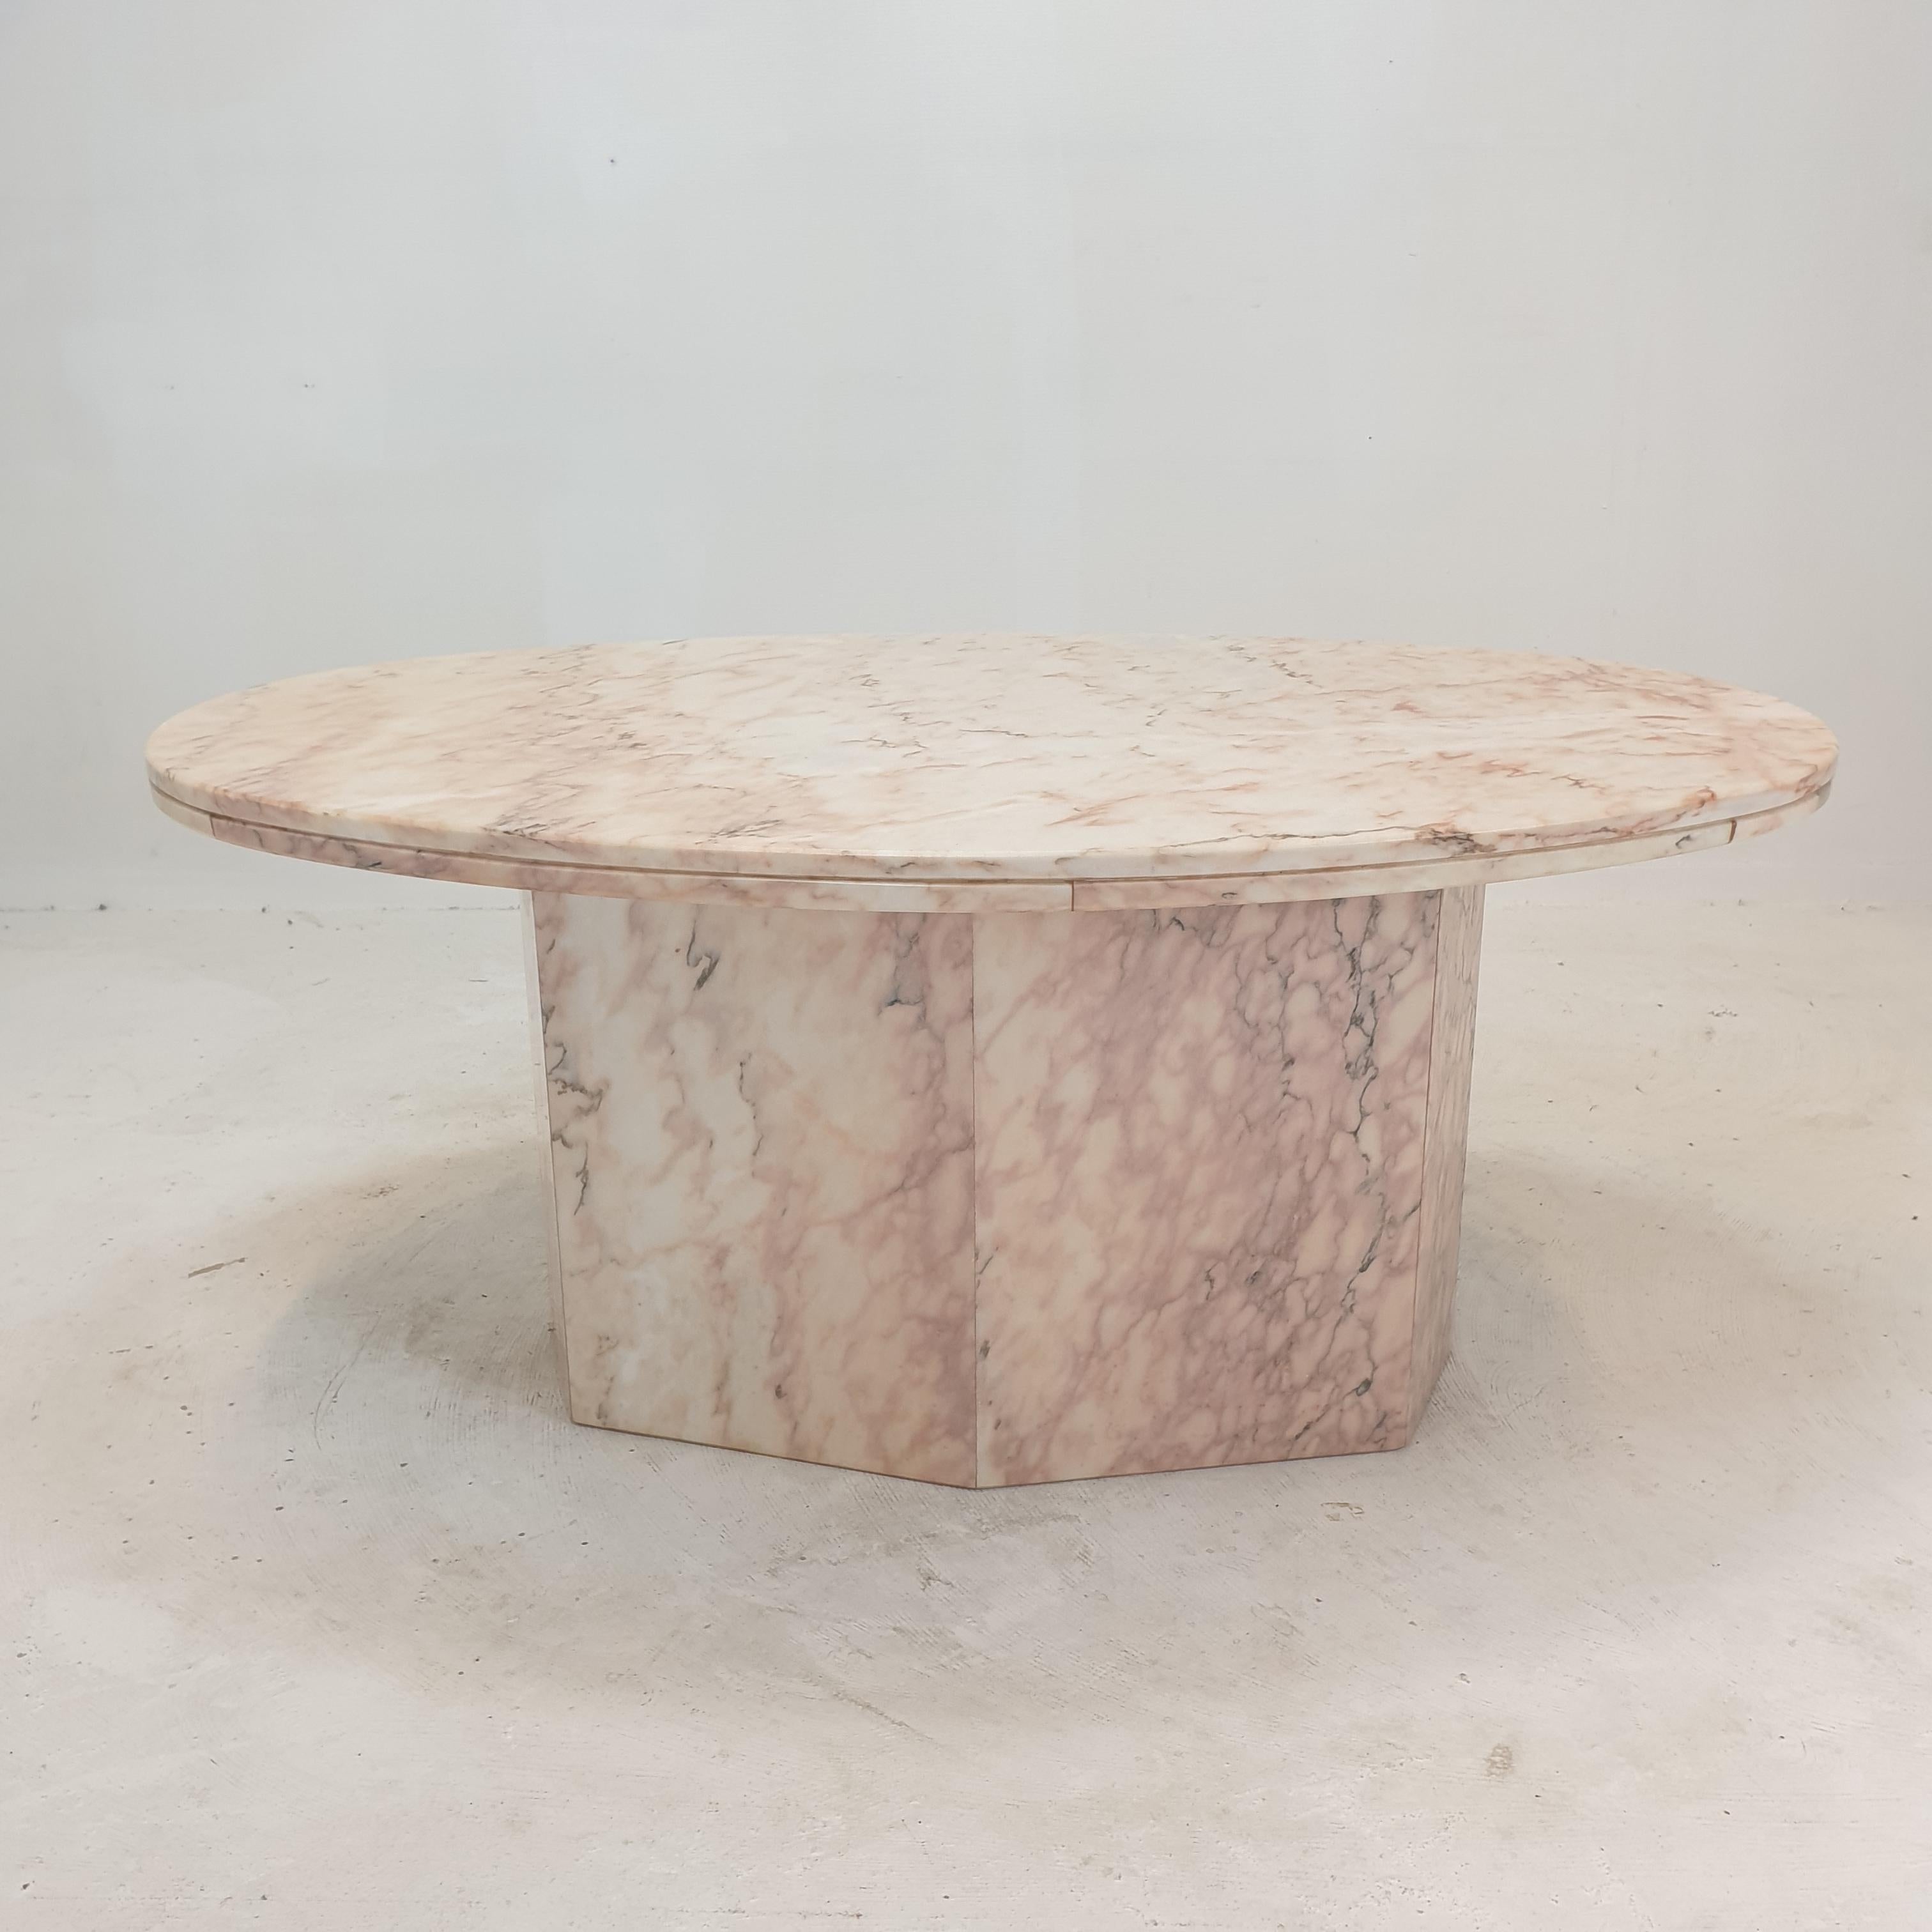 Extraordinary Italian coffee table handcrafted out of marble, 1970's.

The oval top and base are made of very beautiful marble.
The fabulous marble features a very nice pattern of different colors.

It has the normal traces of use, see the